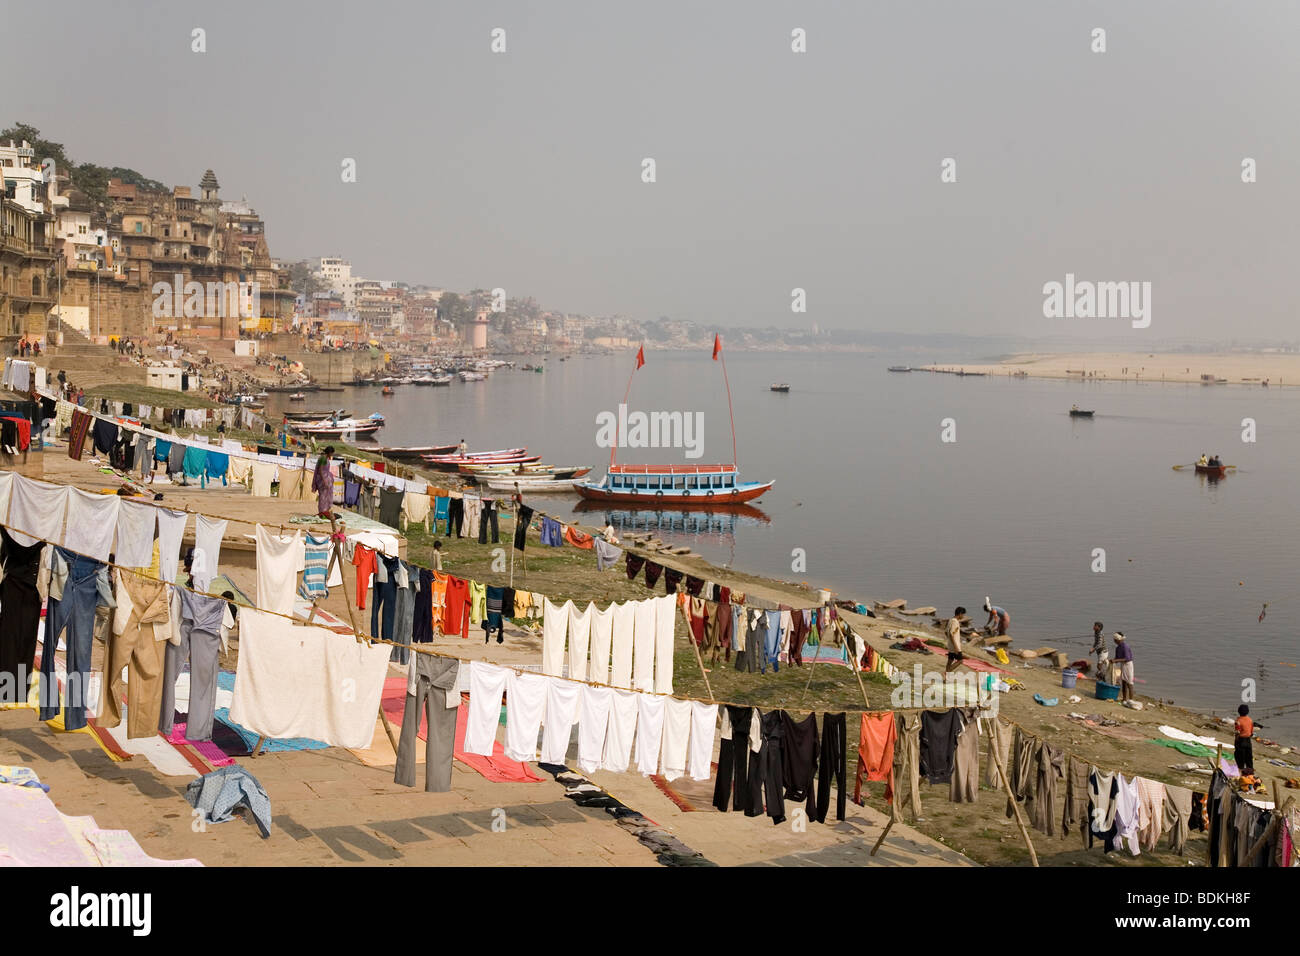 Washing is hung out to dry on the banks of the Ganga (Ganges) river in Varanasi, India. Stock Photo